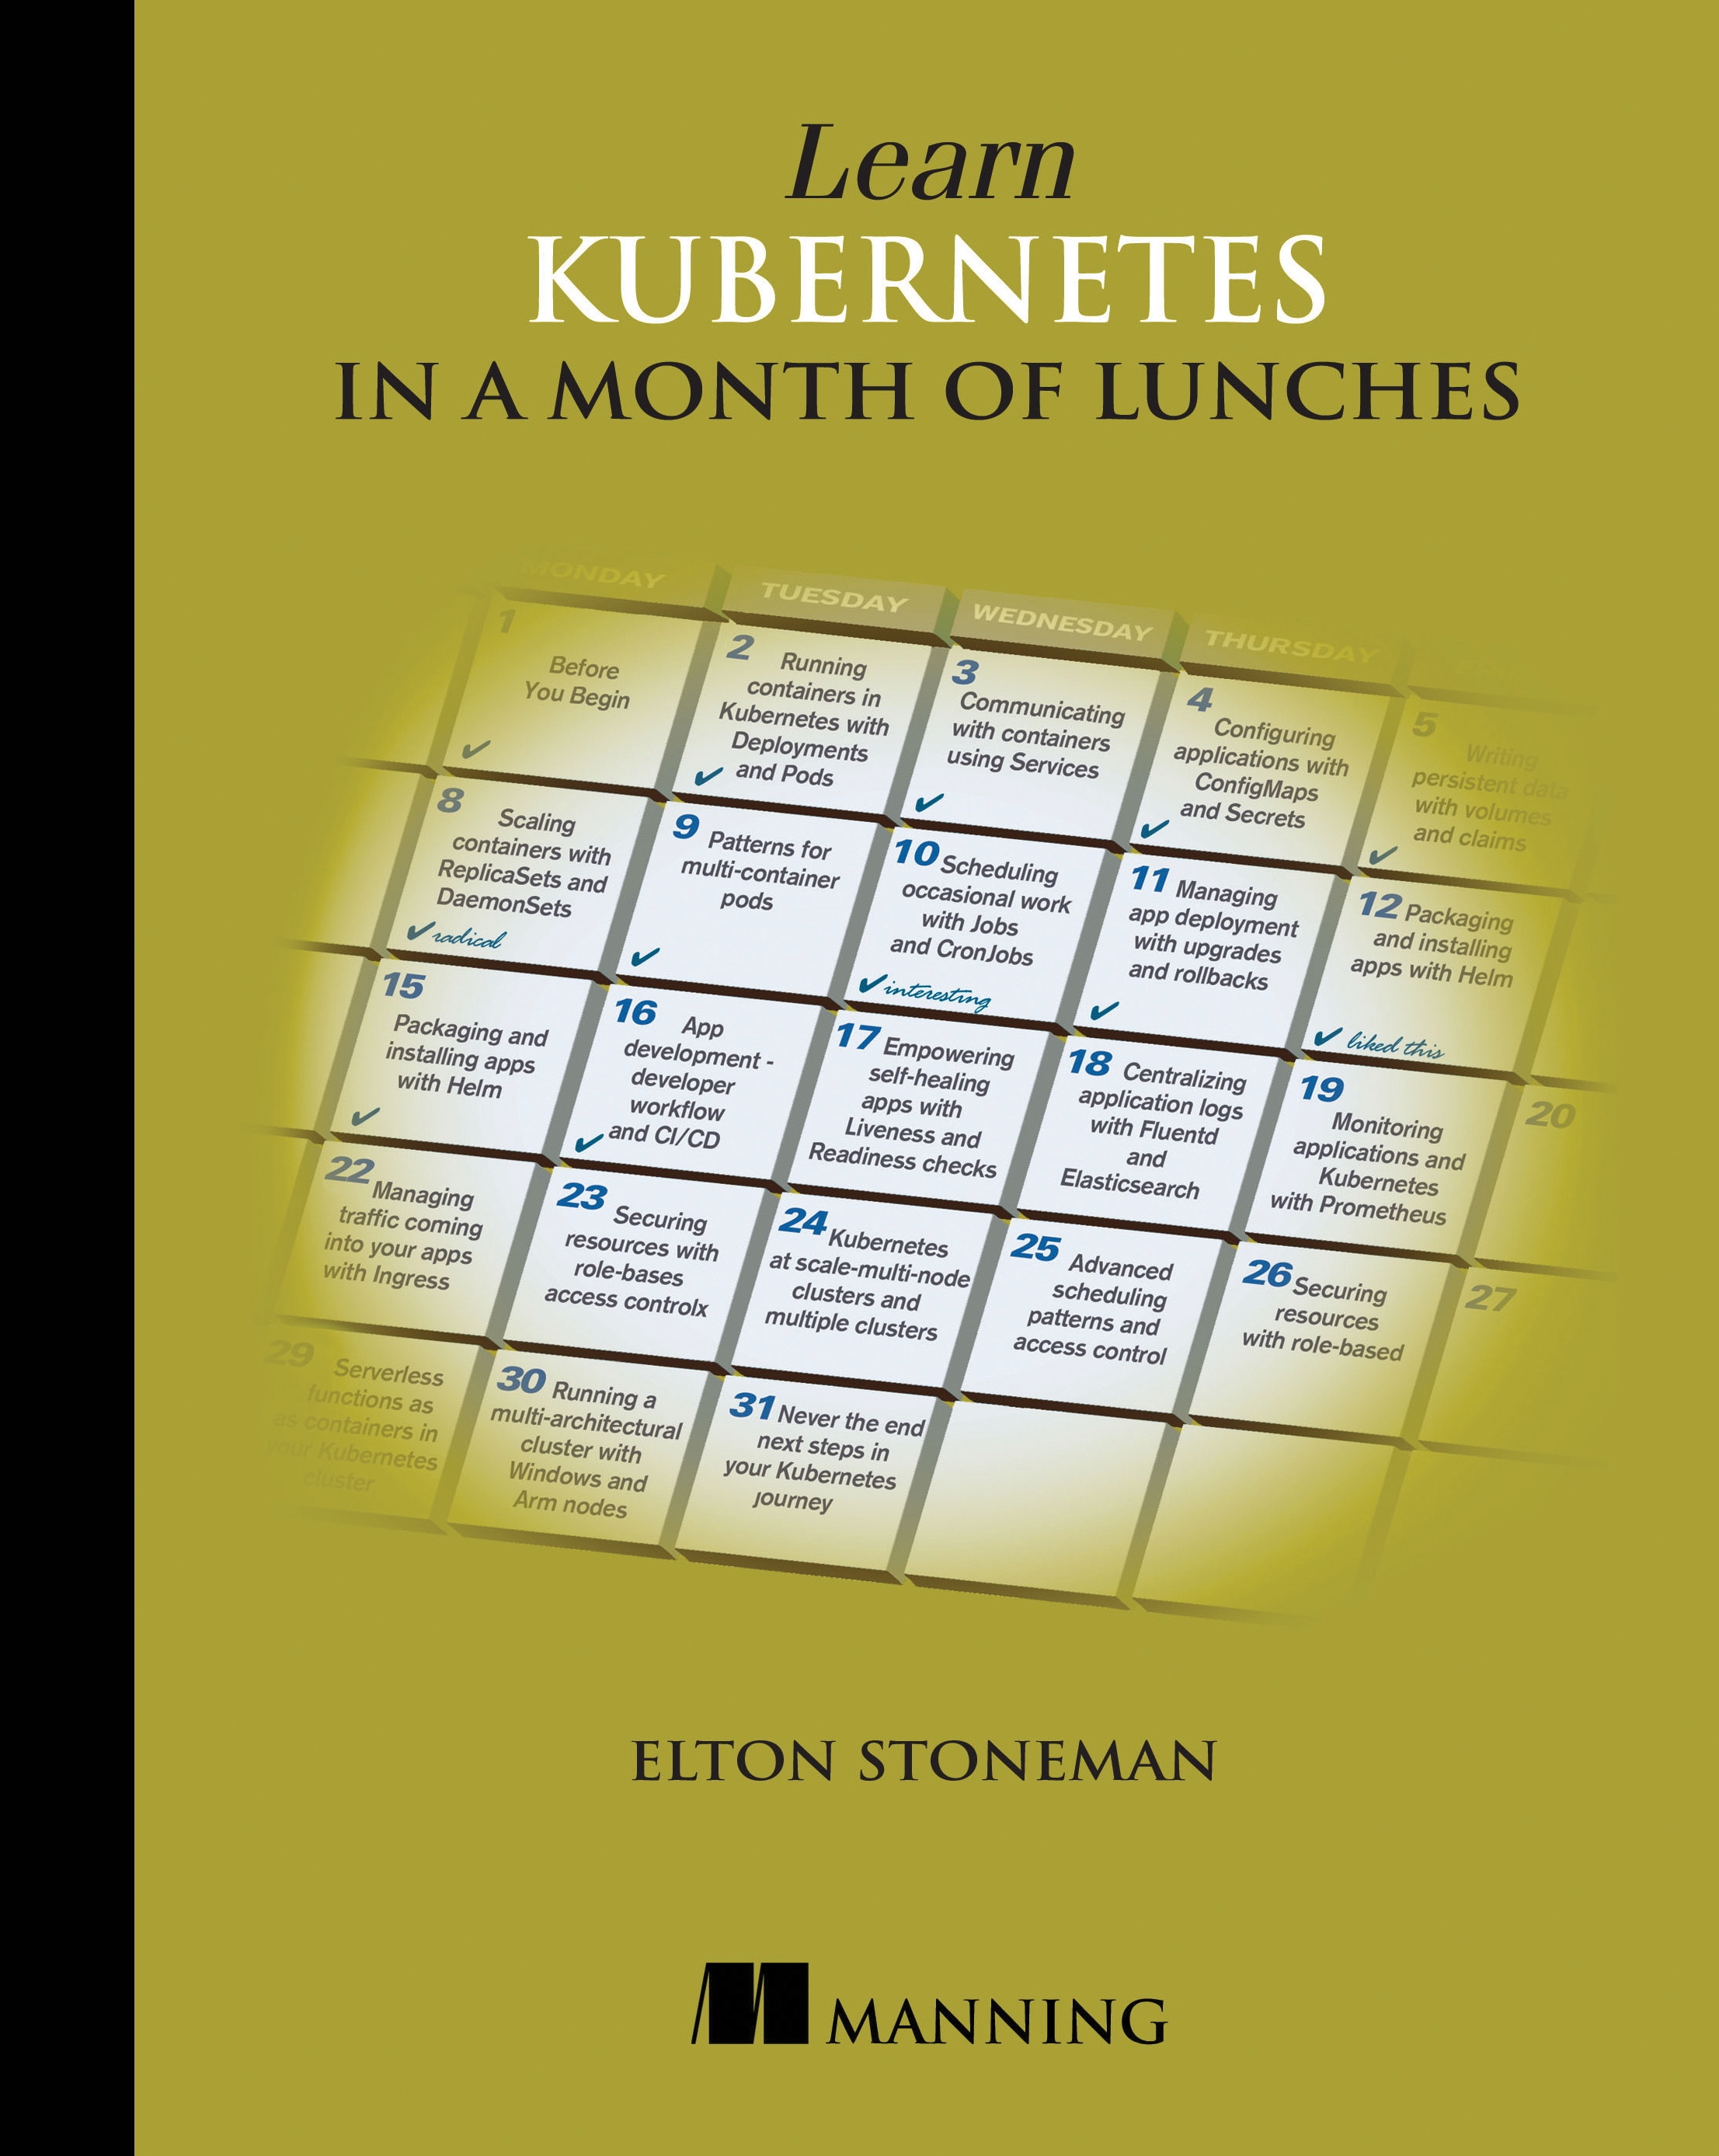 Learn Kubernetes in a Month of Lunches (2021, Manning Publications Co. LLC)